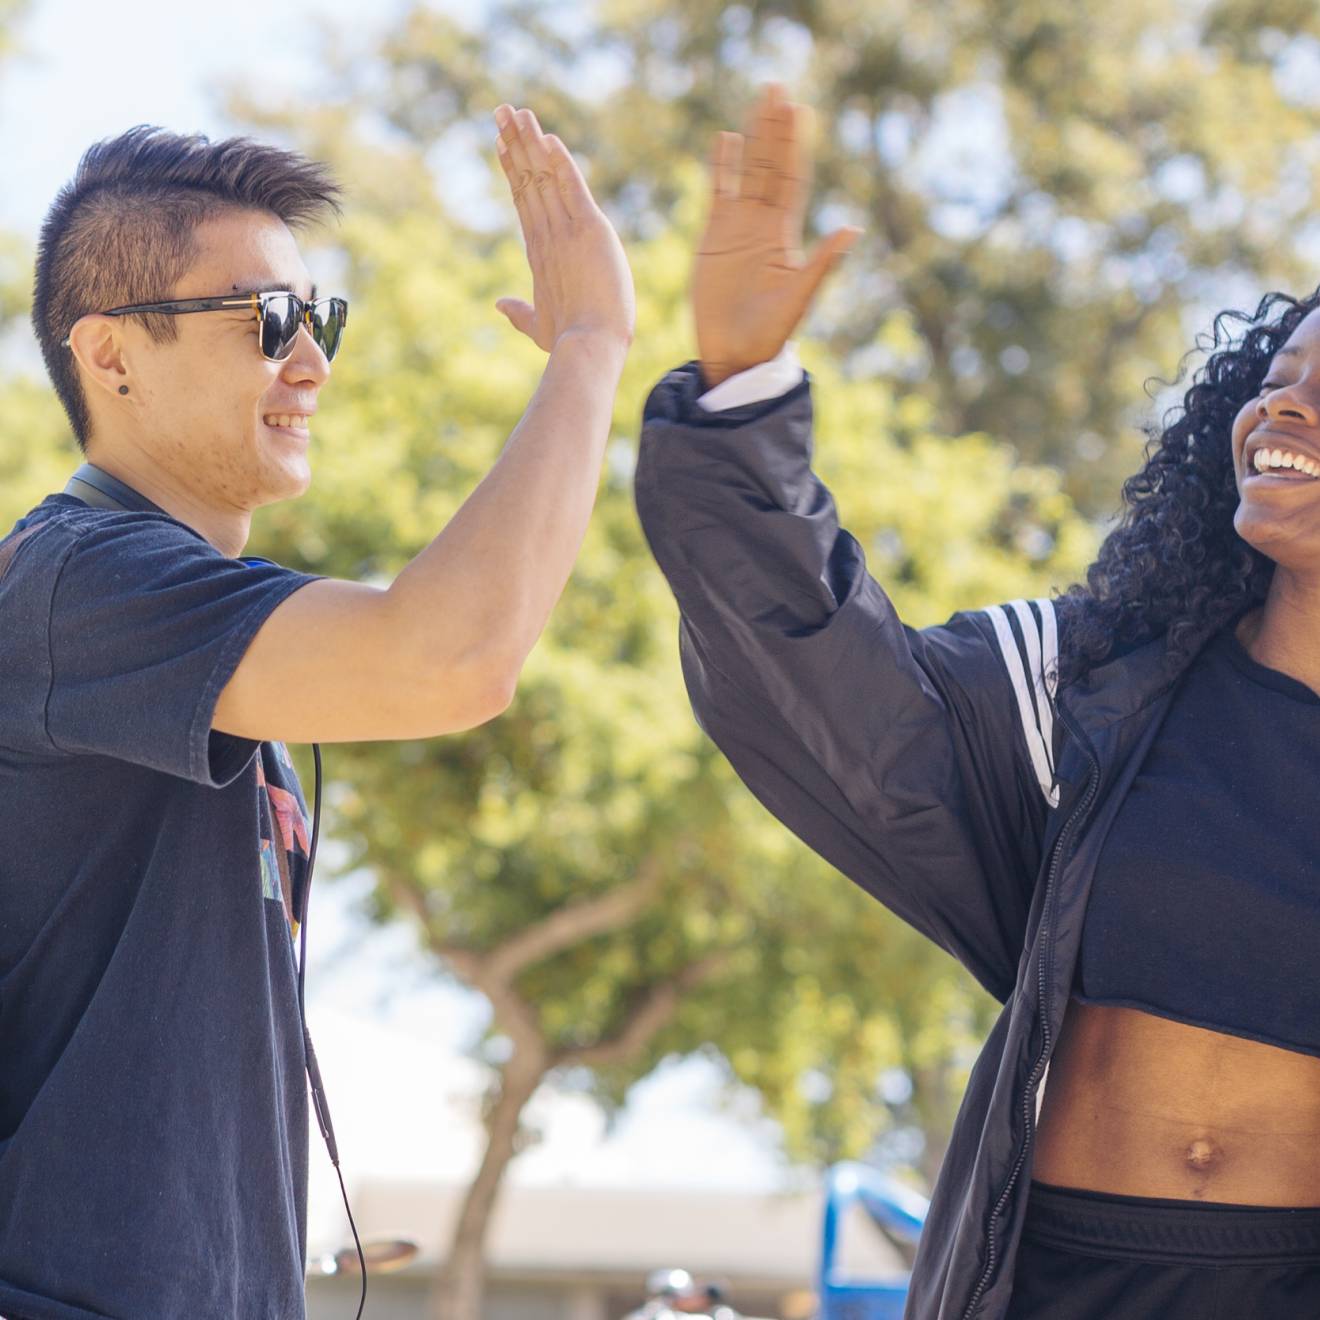 Two UC Davis students, a young Asian man and young Black woman, give each other a high five